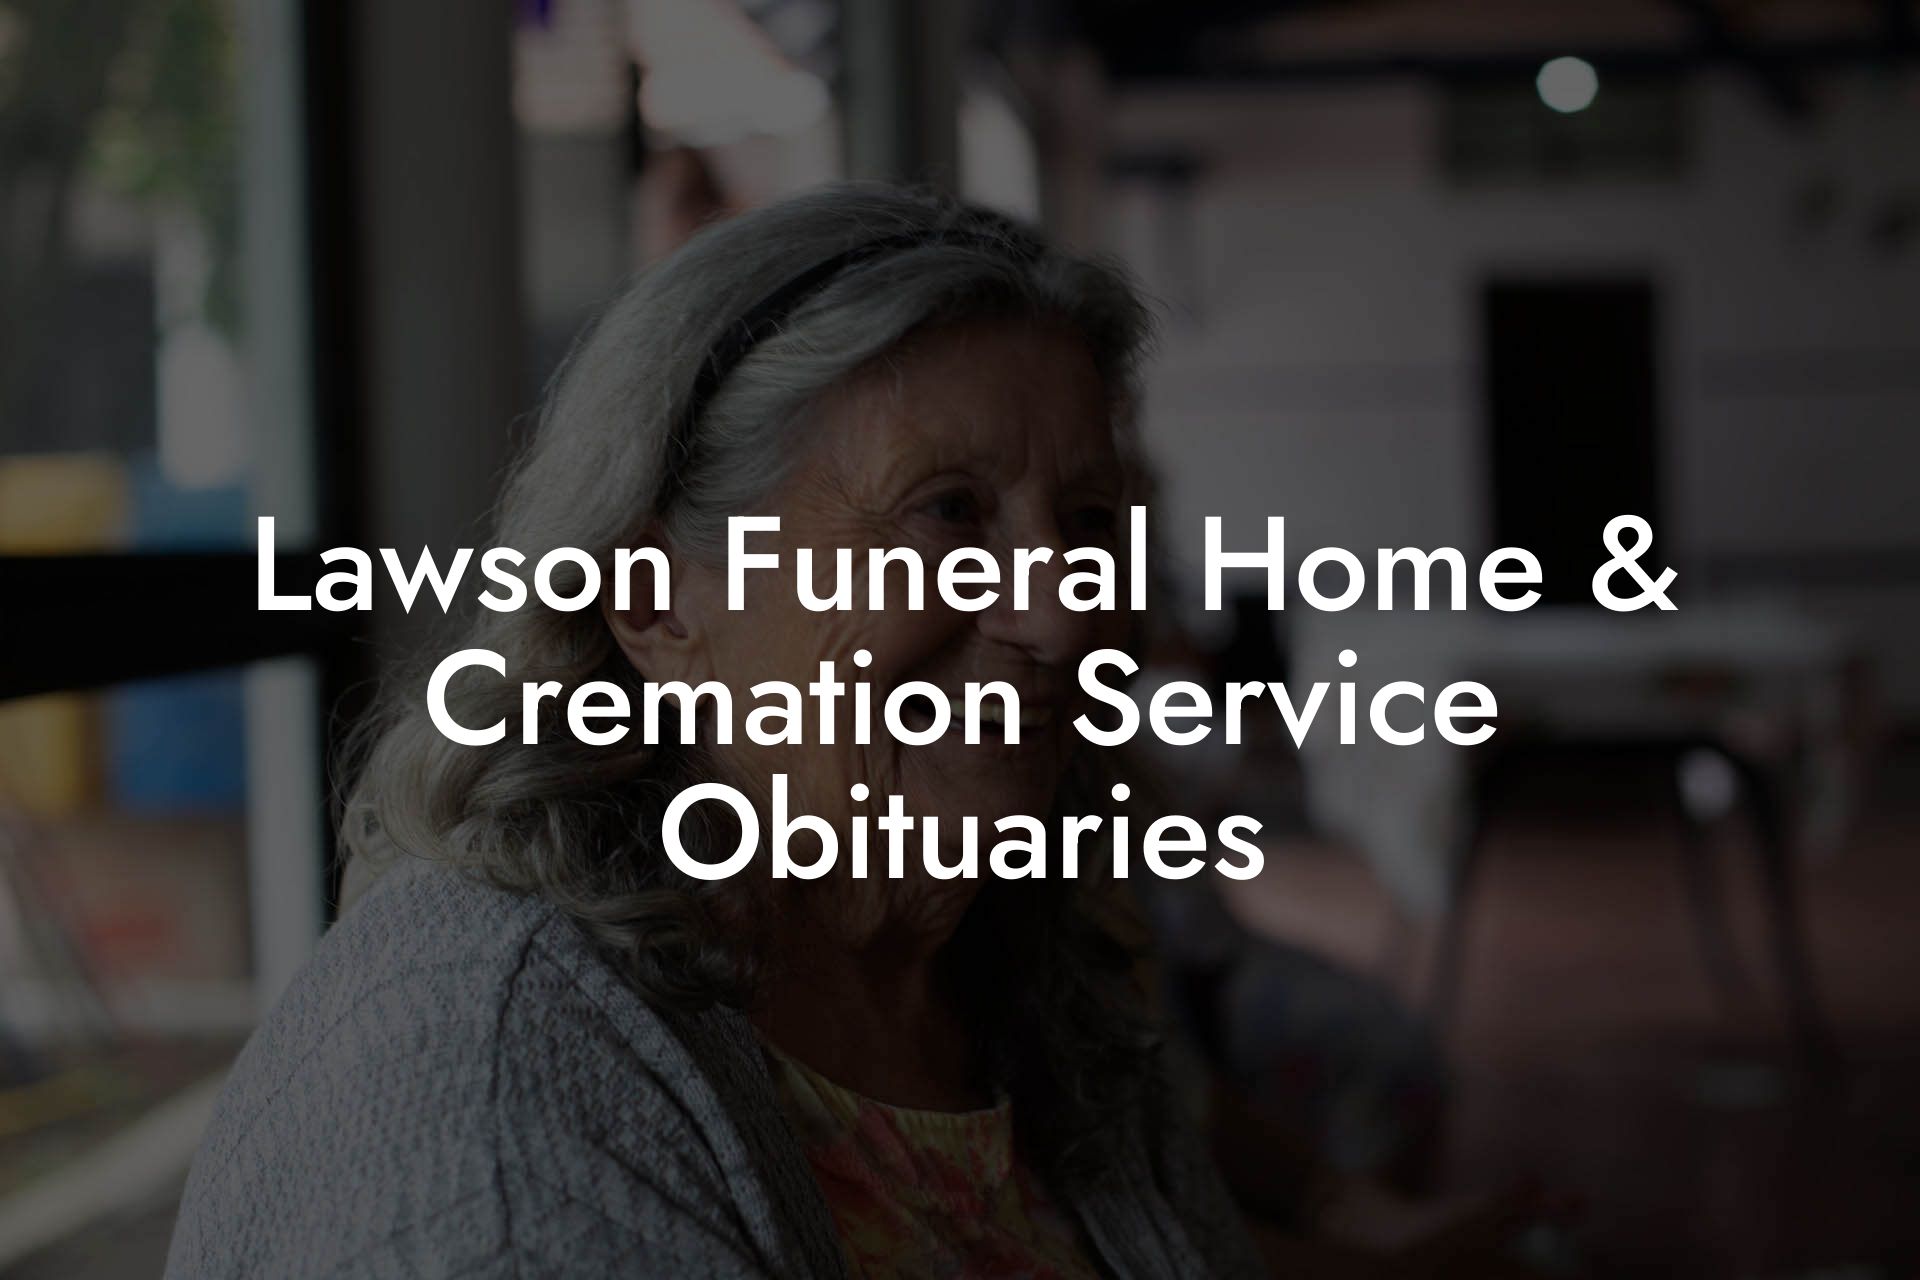 Lawson Funeral Home & Cremation Service Obituaries